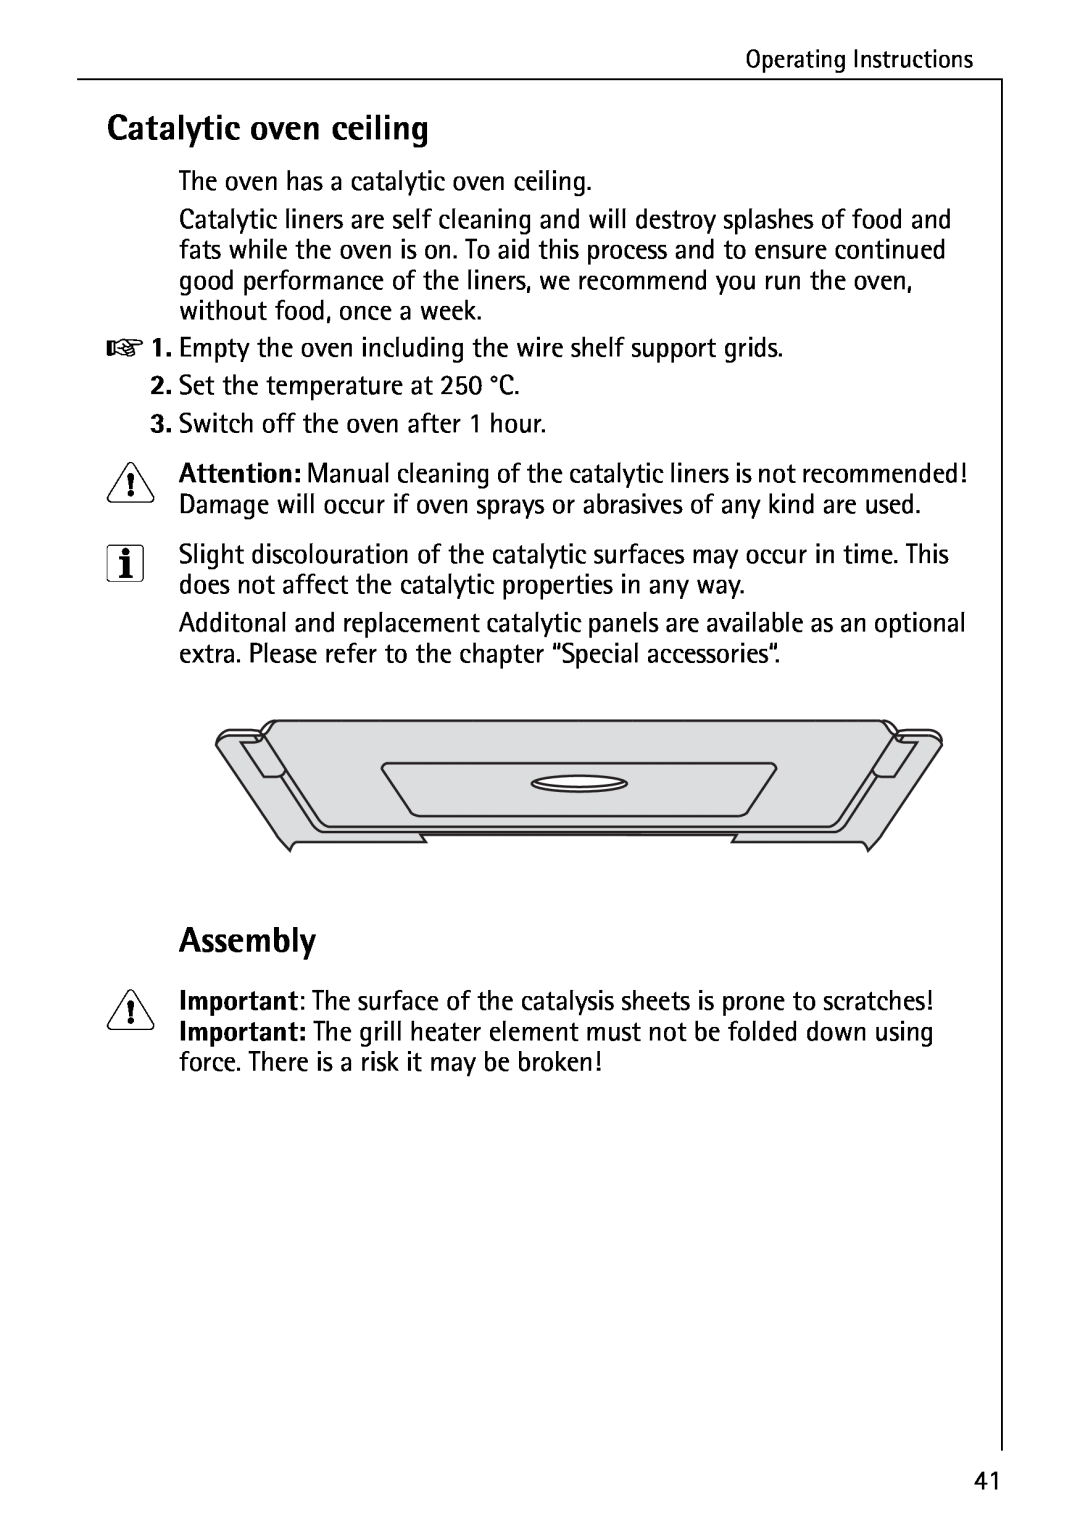 AEG B 4100 operating instructions Catalytic oven ceiling, Assembly 